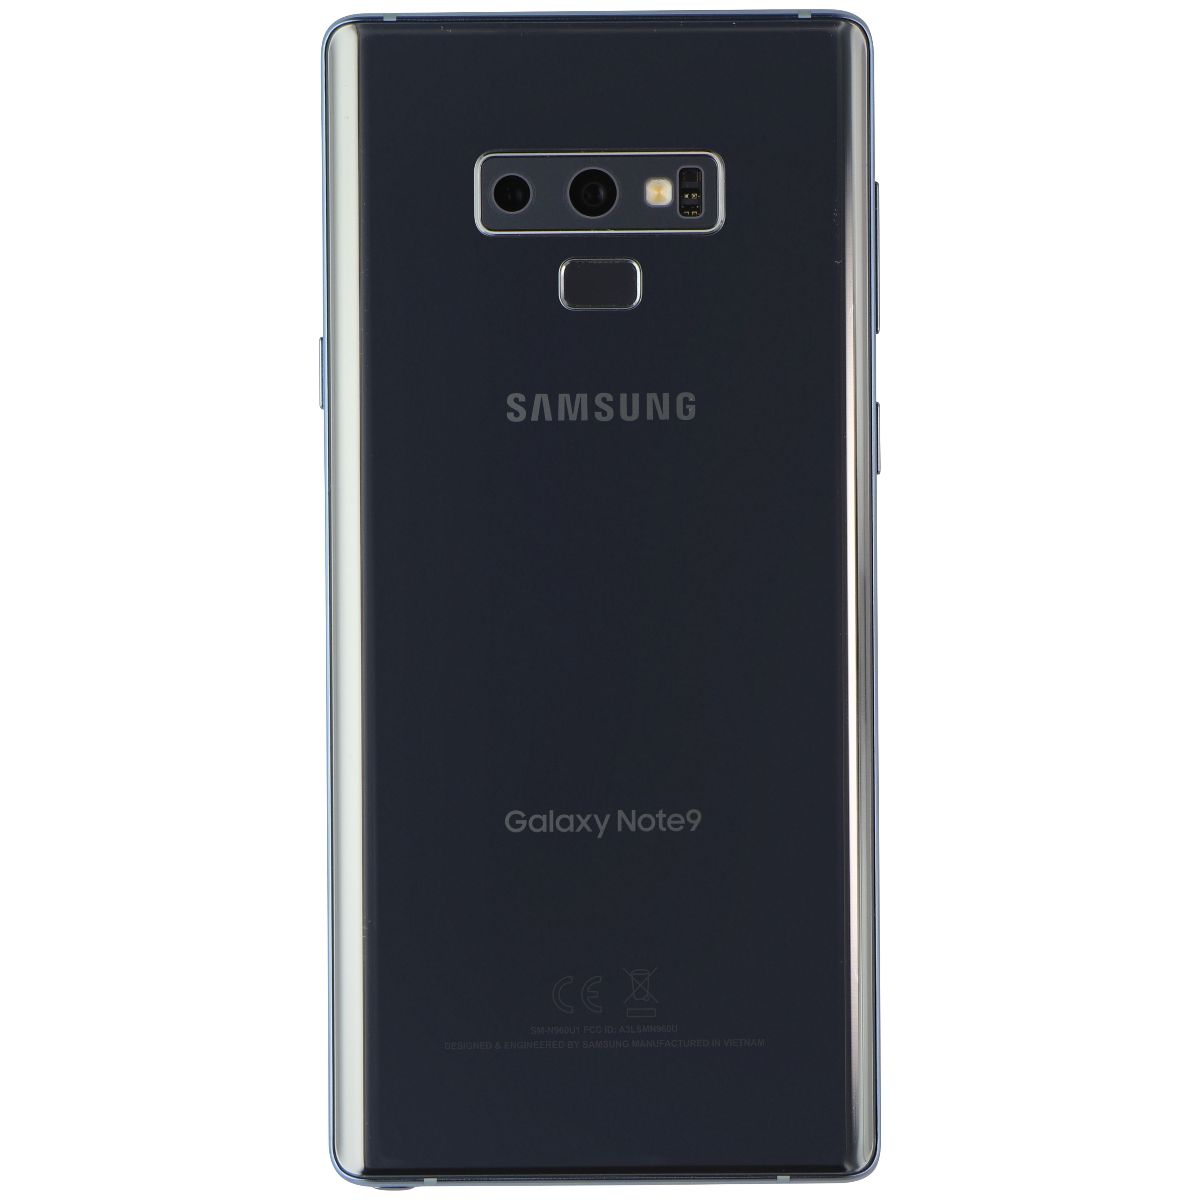 Samsung Galaxy Note9 (6.4-inch) SM-N960U1 (Unlocked) - 128GB/Cloud Silver Cell Phones & Smartphones Samsung    - Simple Cell Bulk Wholesale Pricing - USA Seller